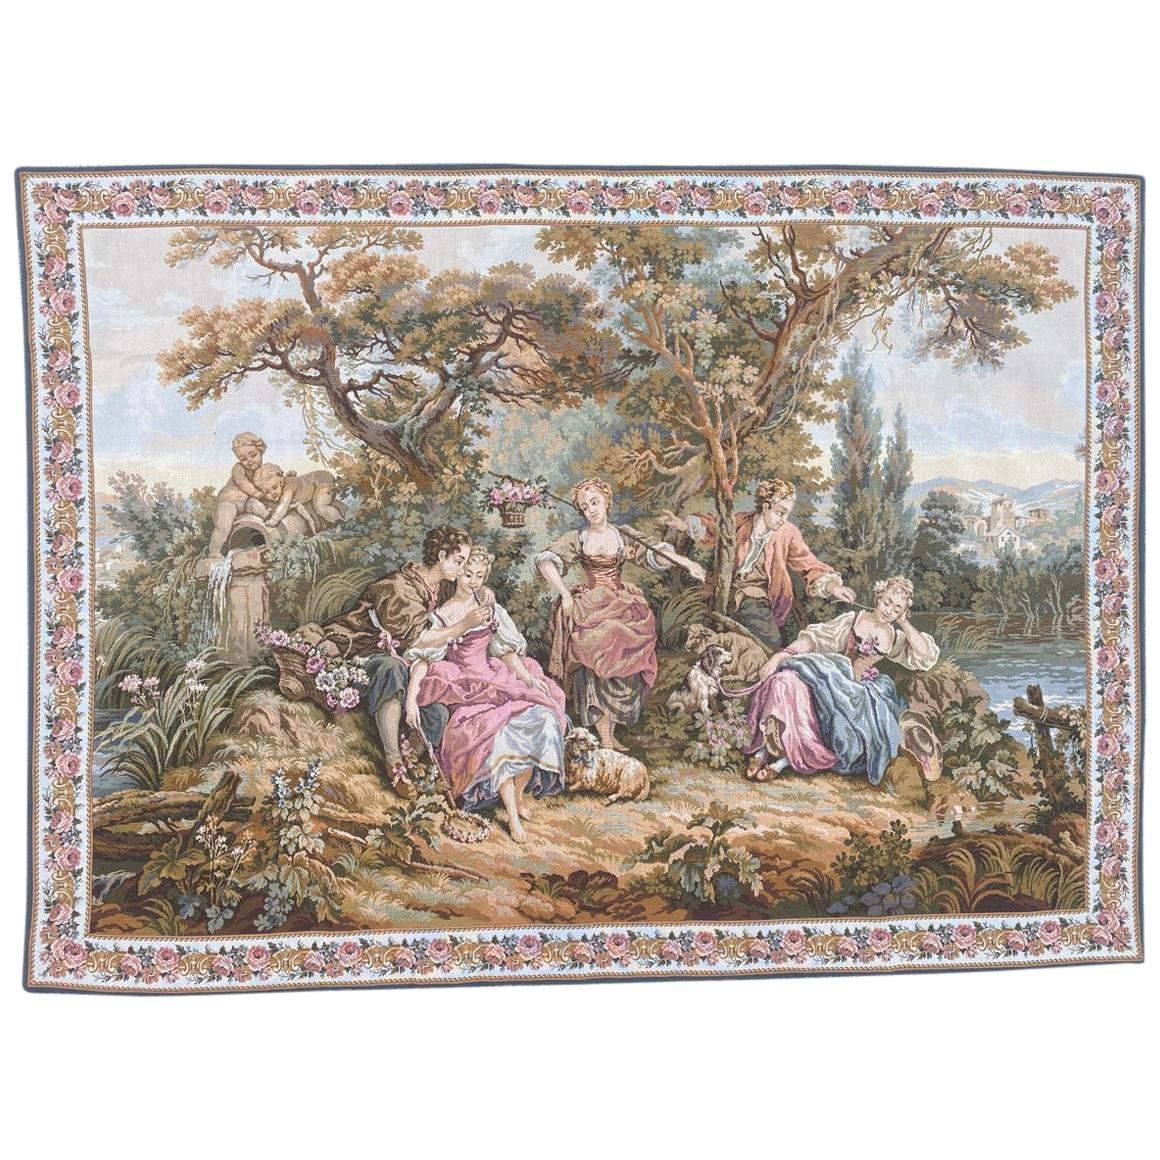 Very Pretty Vintage Aubusson Style French Halluin Manufacturing Tapestry